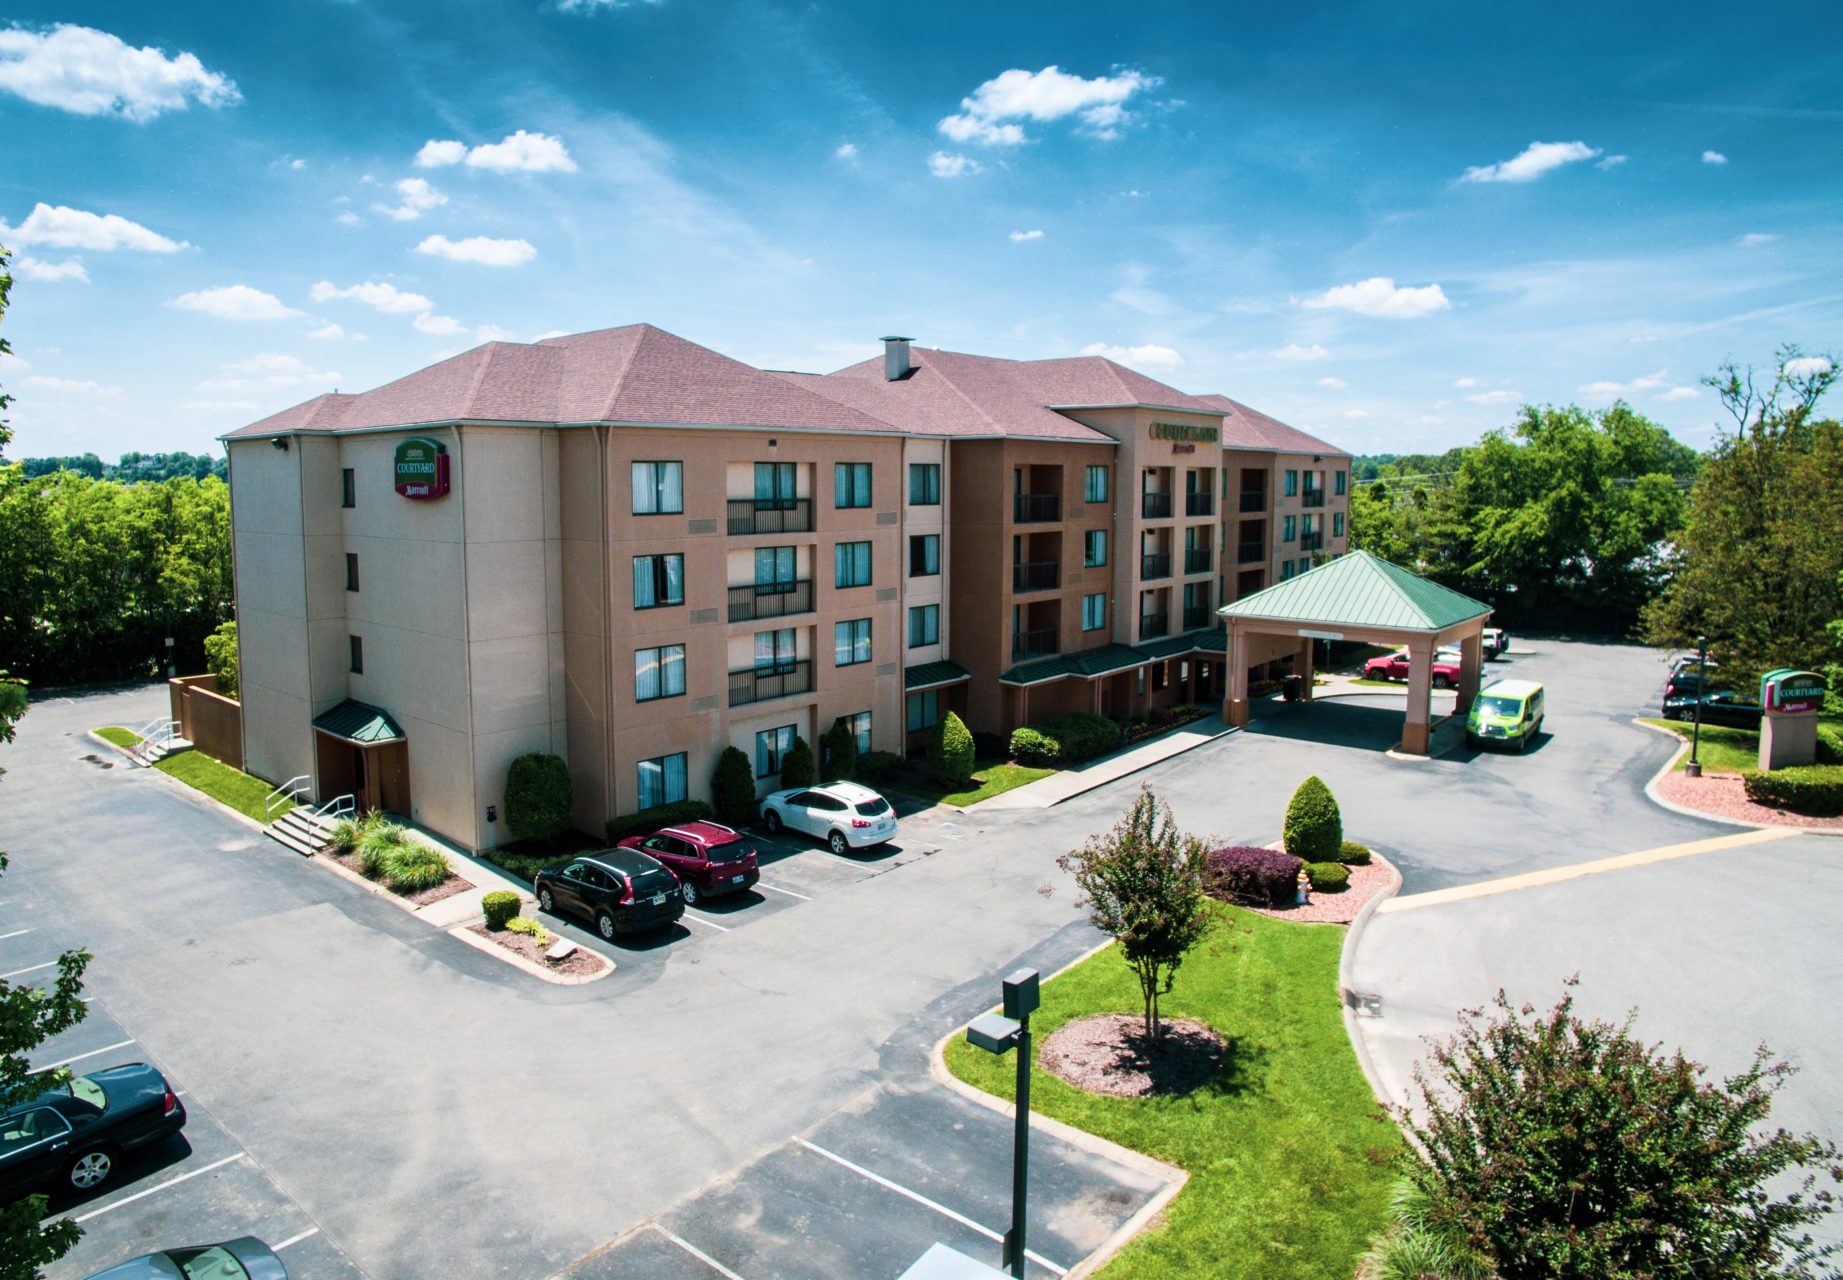 The company traded  the Fairfield Inn  Suites and Courtyard by Marriott in Nashville comprising a total of 203 guestrooms